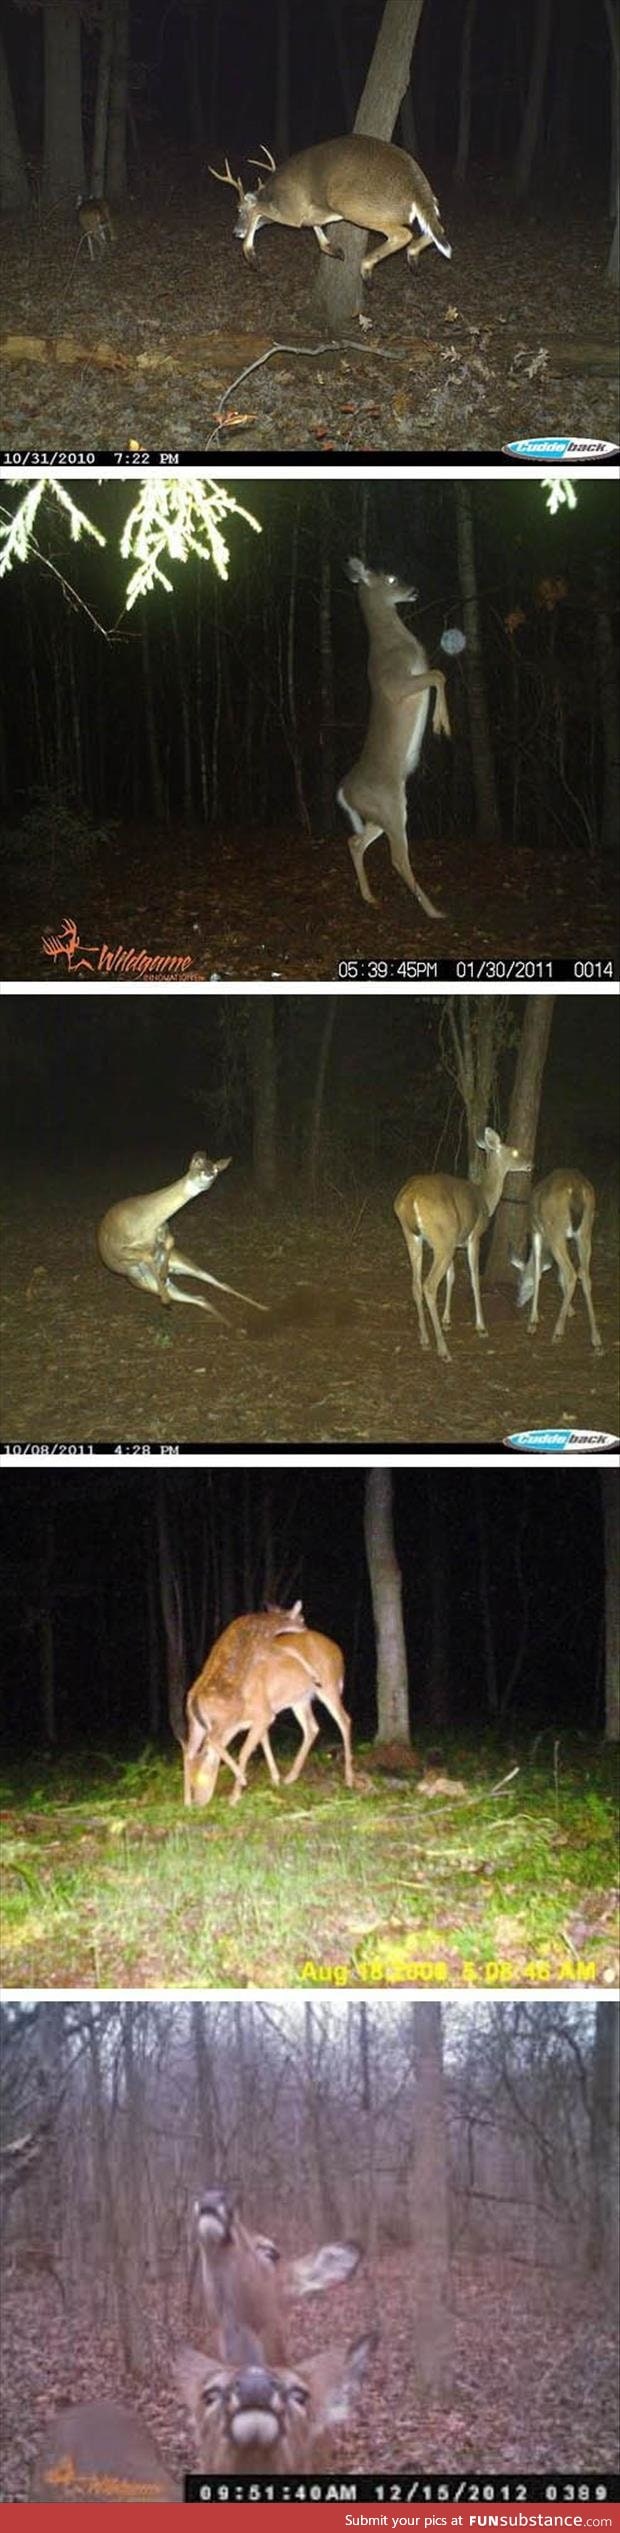 Let’s All Take A Moment To Appreciate The Majestic Trail Camera Deer